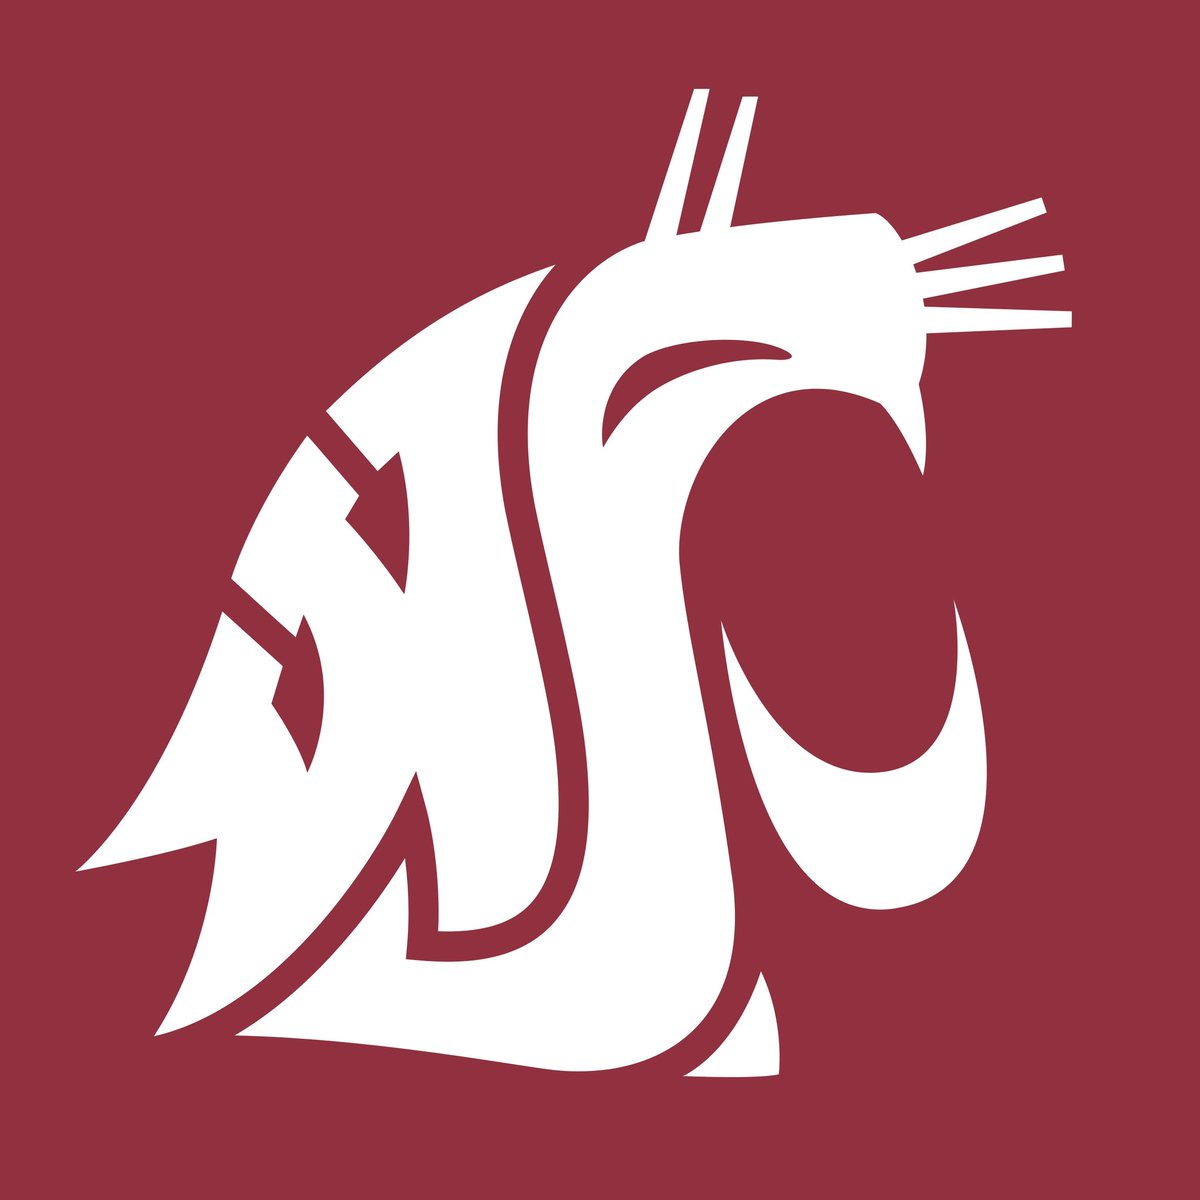 After a great day at camp IM honored to announce I have received my very first Division 1 offer from @WSUCougarFB. Thank you to @SchmeddingJeff and @CoachDickert for this opportunity. #GoCougs

@BrandonHuffman @PNWSports_ @Micah_Chen @NickFarman55 @Pro_Vision_Acad